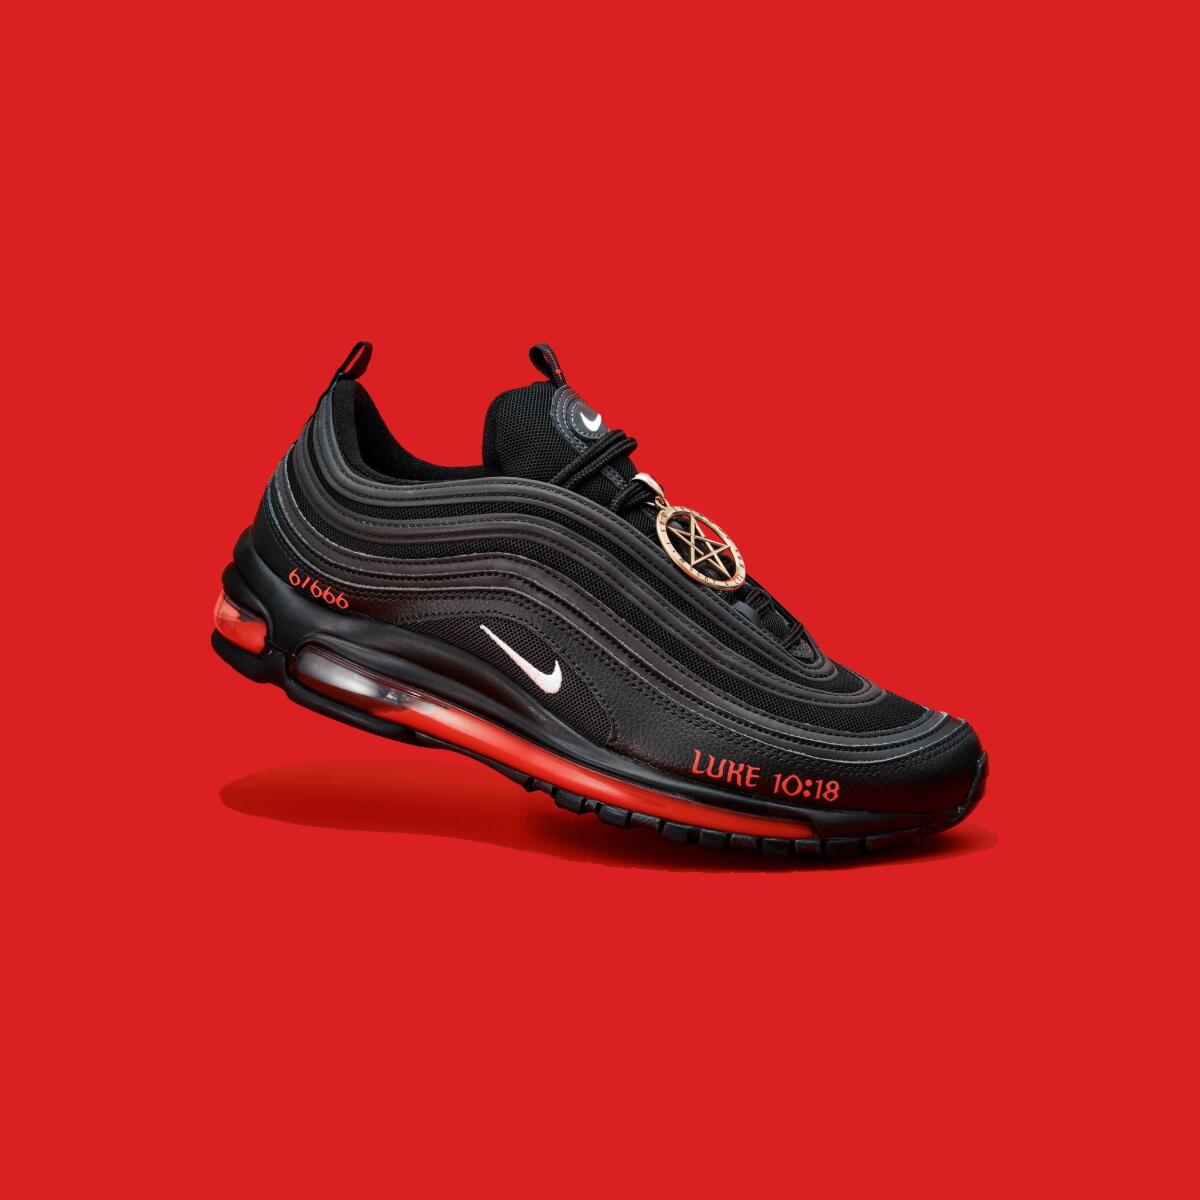 A single black "Satan Shoe" in front of a red background